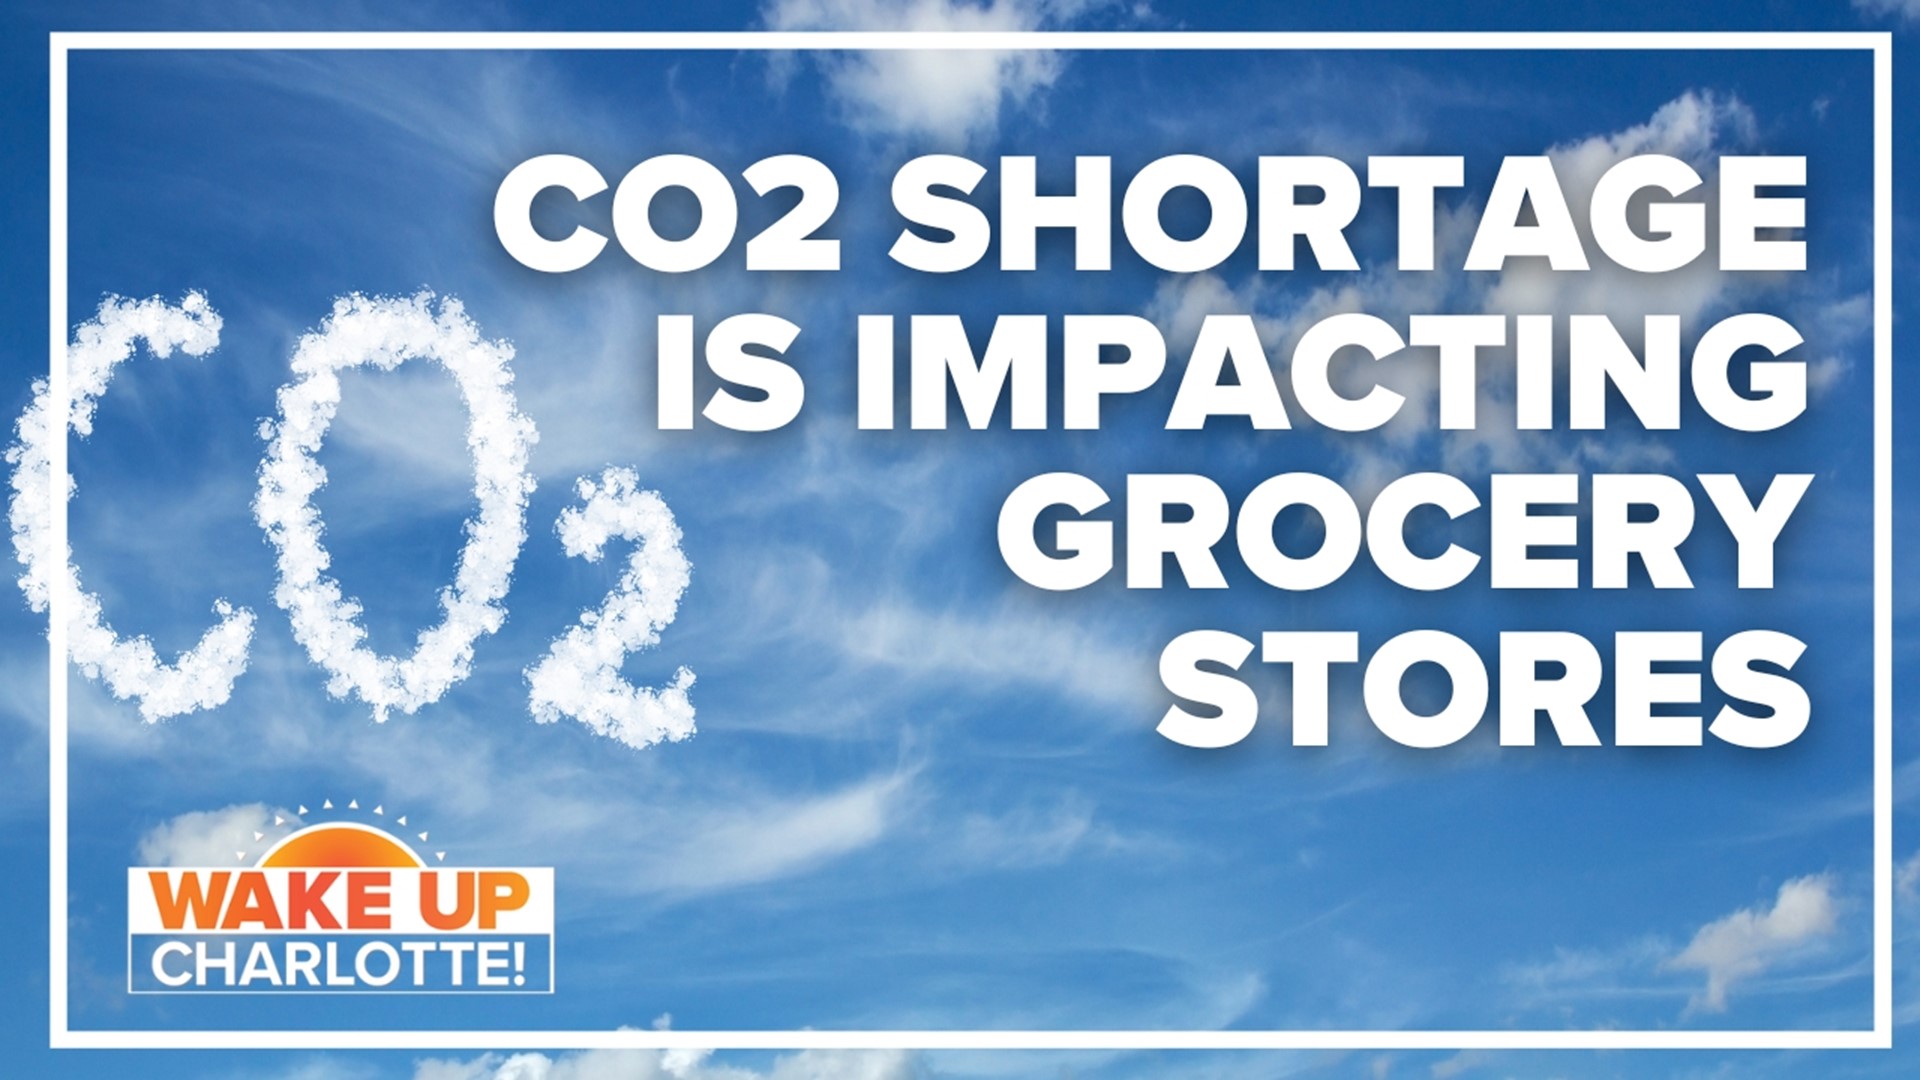 With a bunch of shortages continuing around the country, the lack of Carbon Dioxide could have grocery stores scrambling